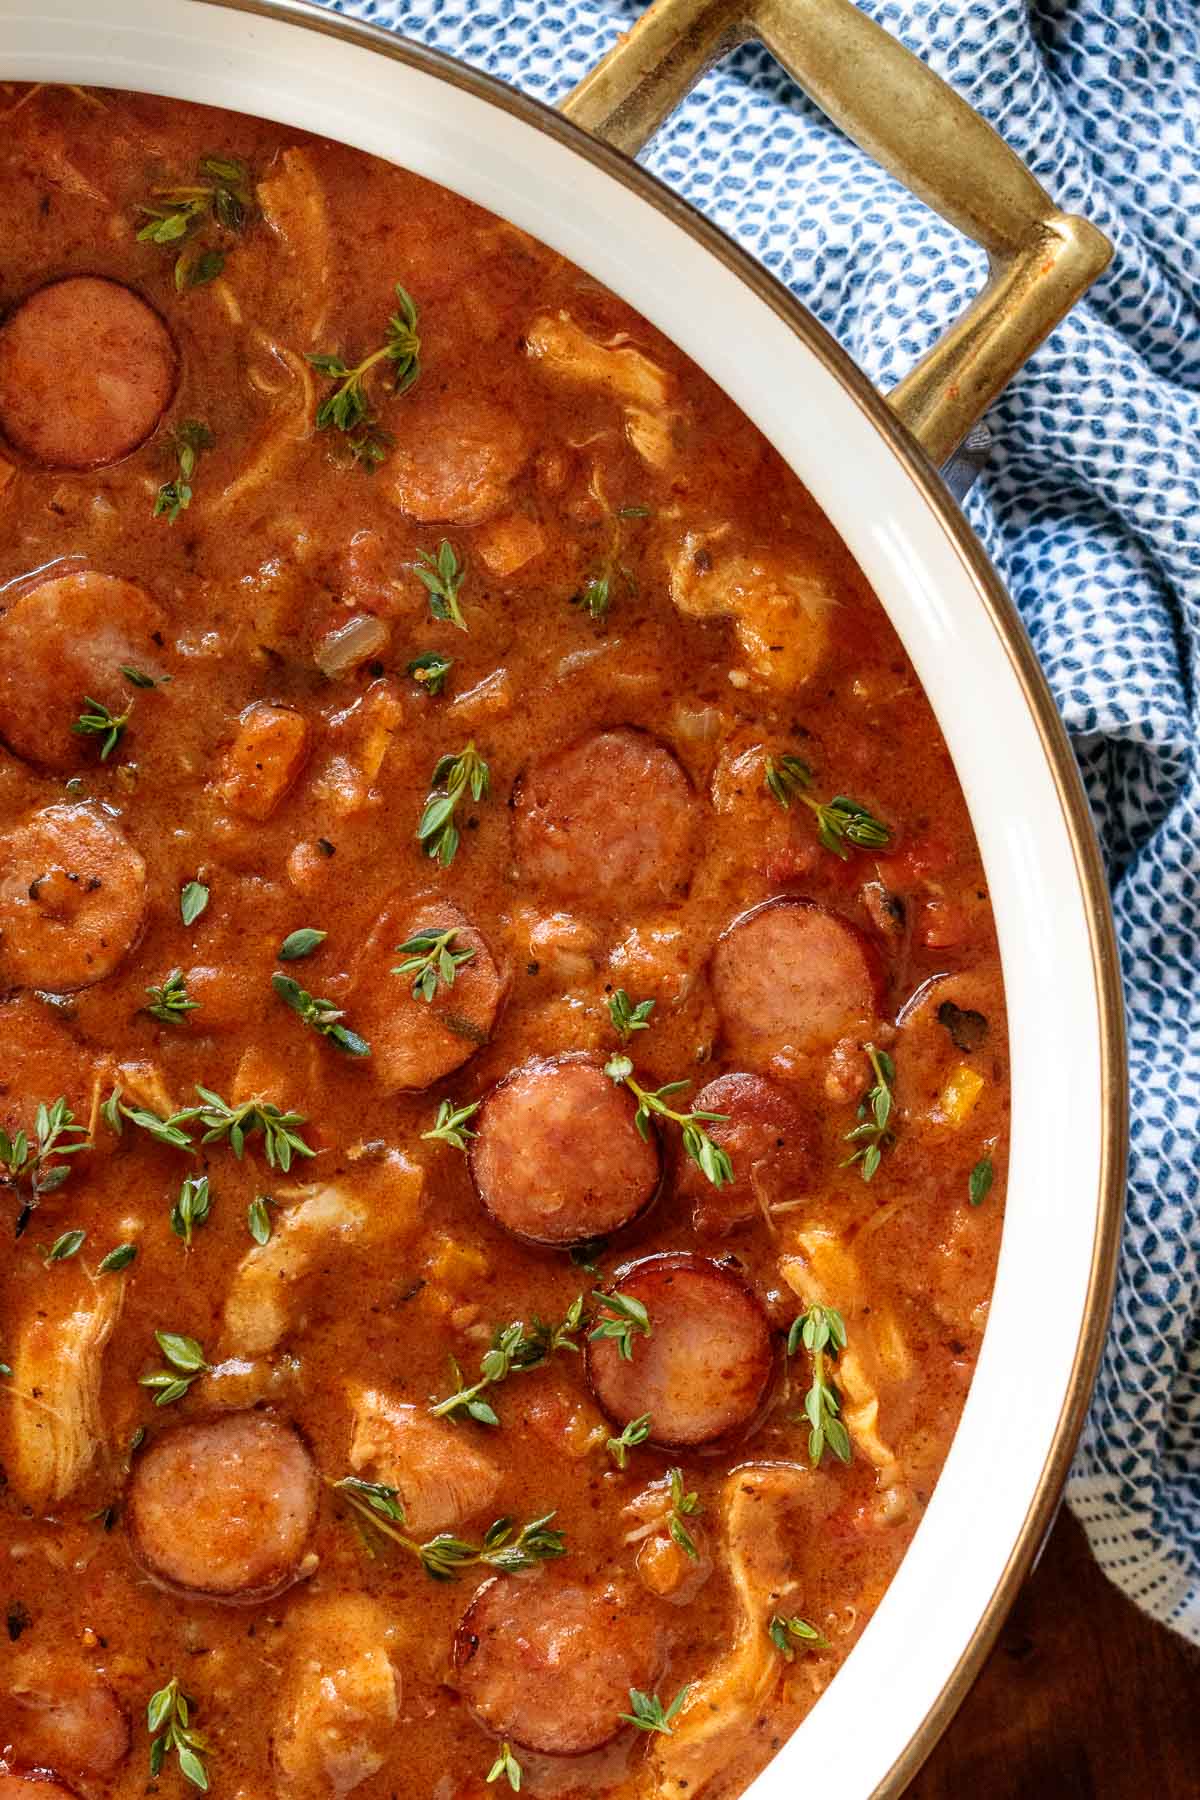 Vertical overhead closeup photo of a pot of Make-Ahead Chicken Andouille Gumbo next to a blue and white patterned cloth.